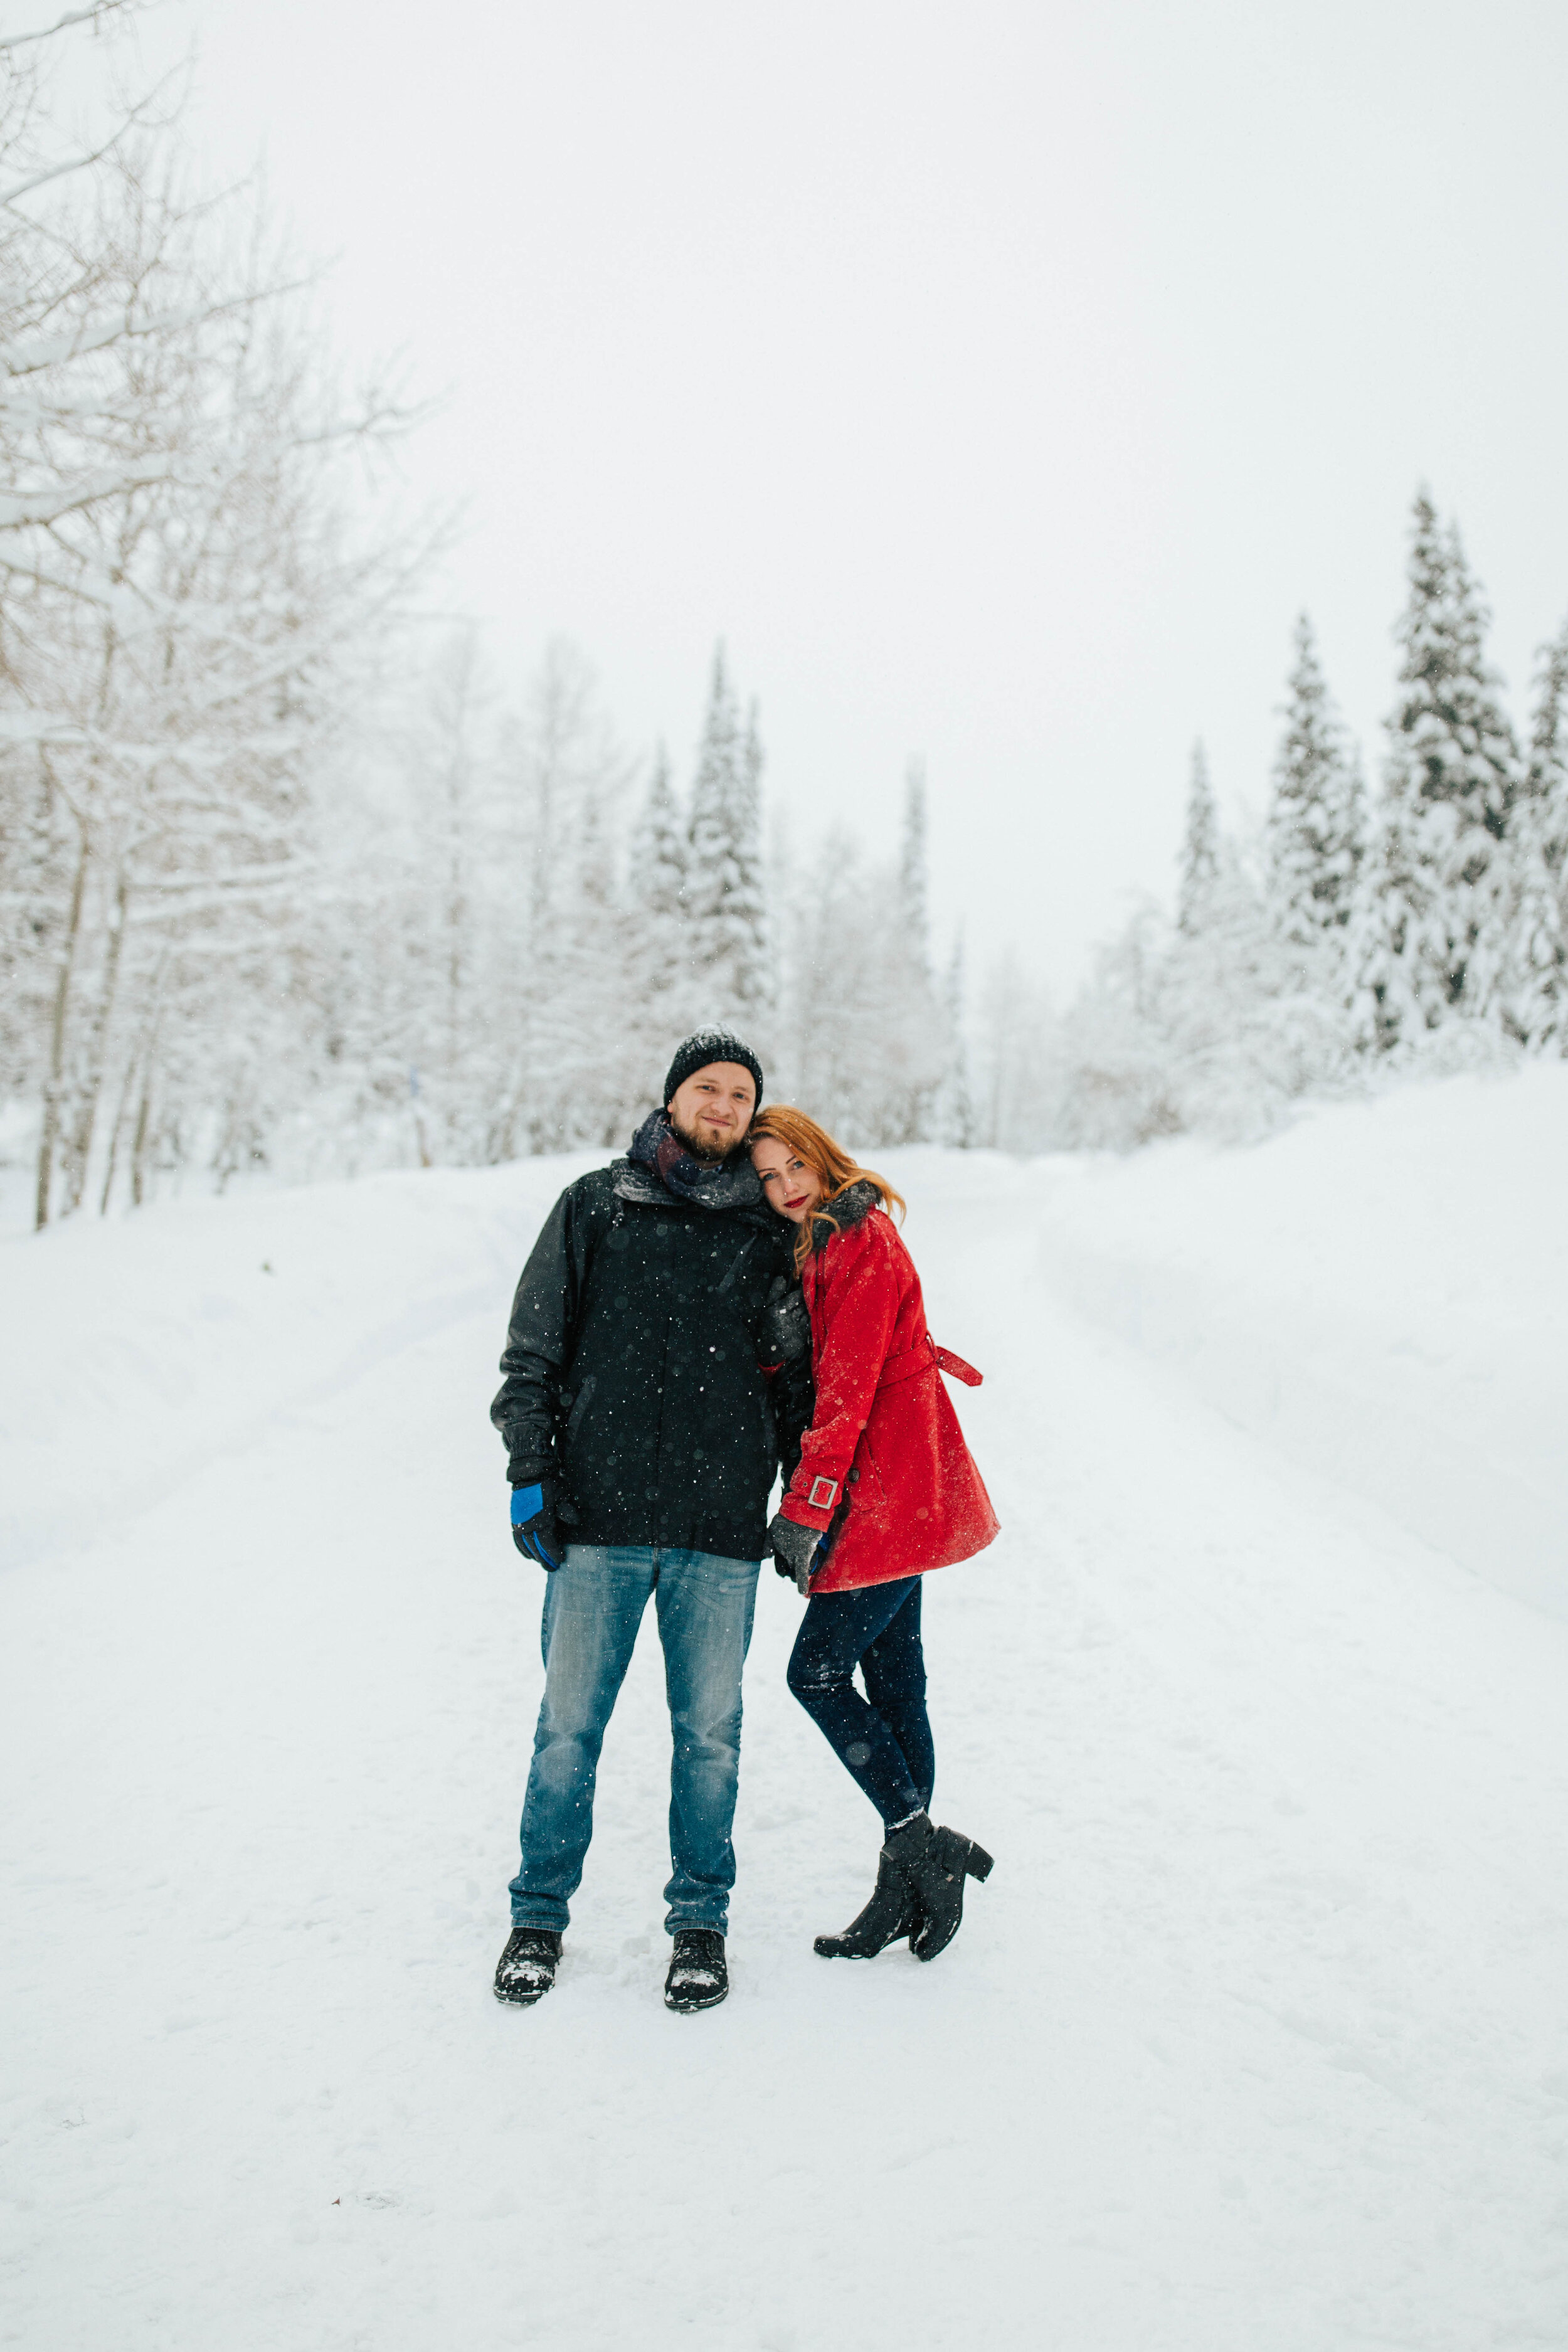 Winter couples session engagements snow mountains cozy wrapped in blanket #coupleshoot #utahphotographer #weddingphotographer #engagementsession #engagementshoot